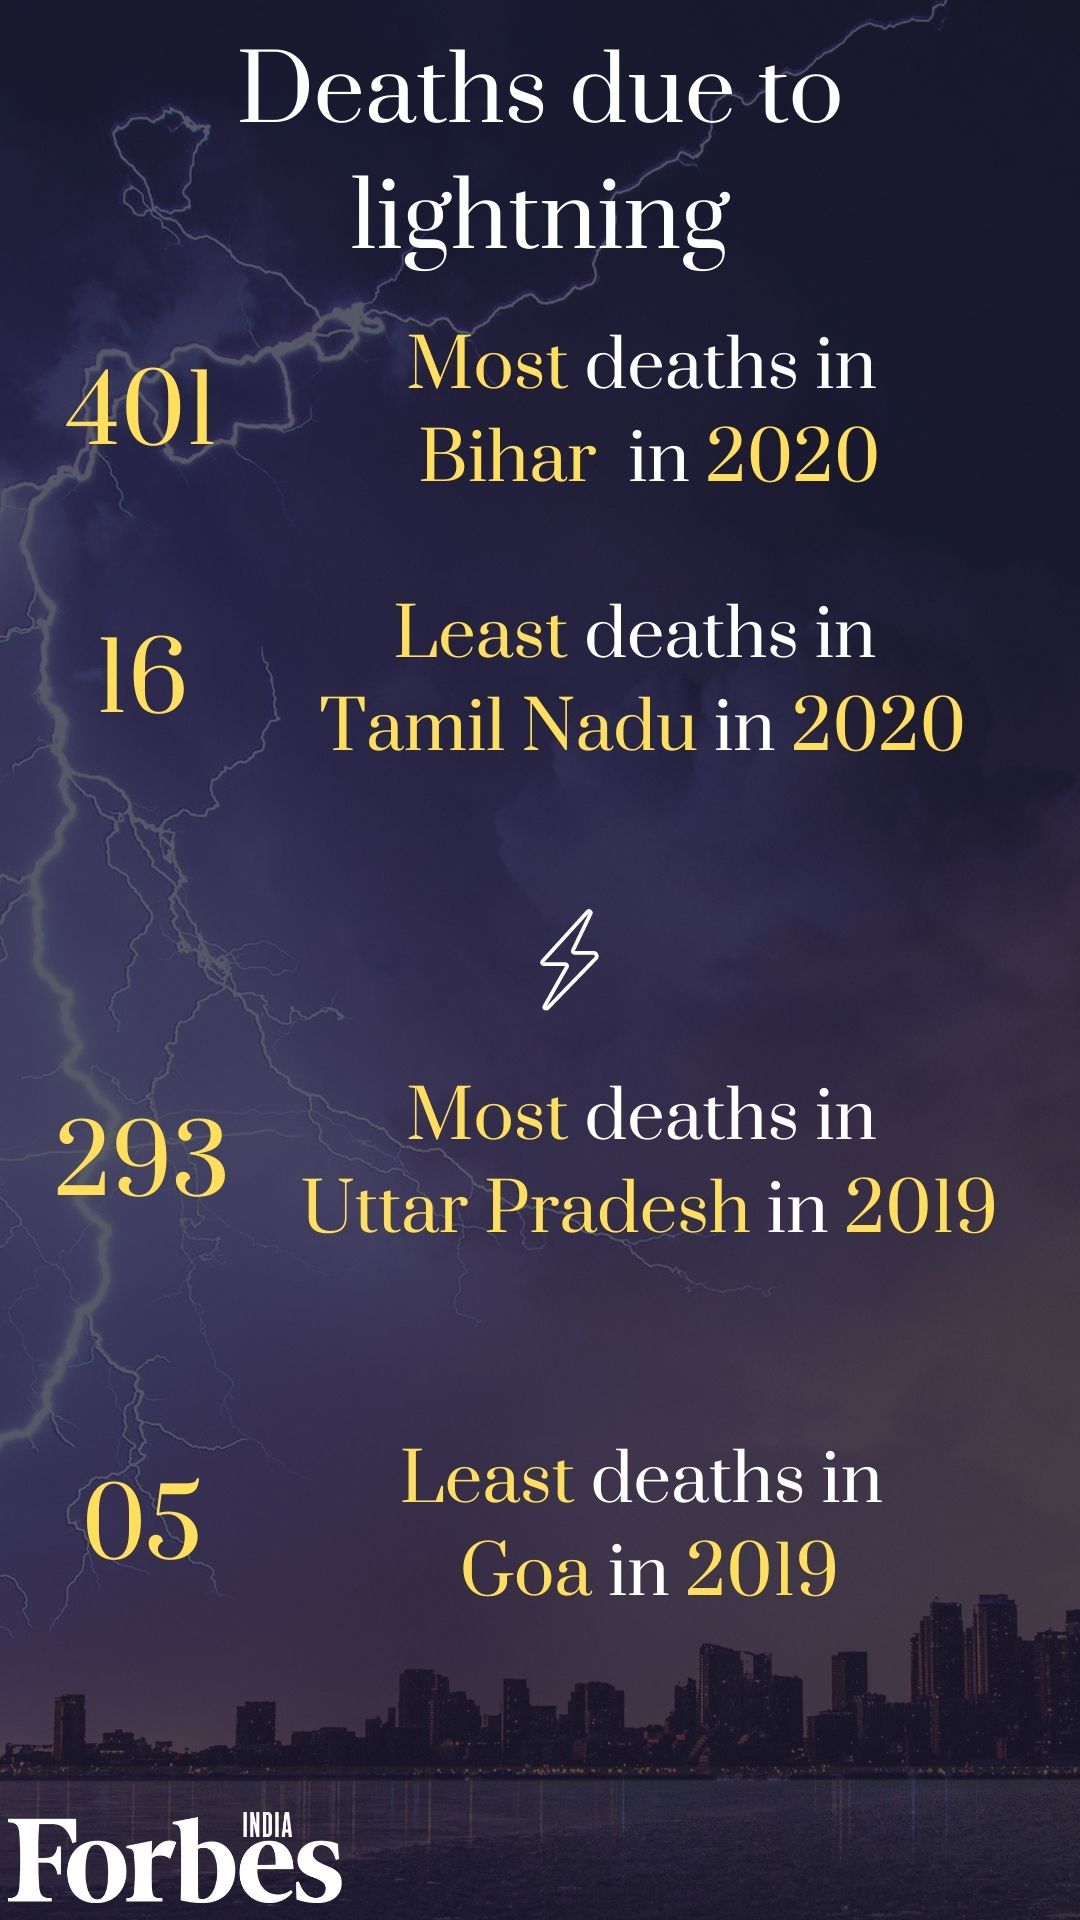 Another climate change fallout: India sees 4.68 lakh more lightning strikes in 2020